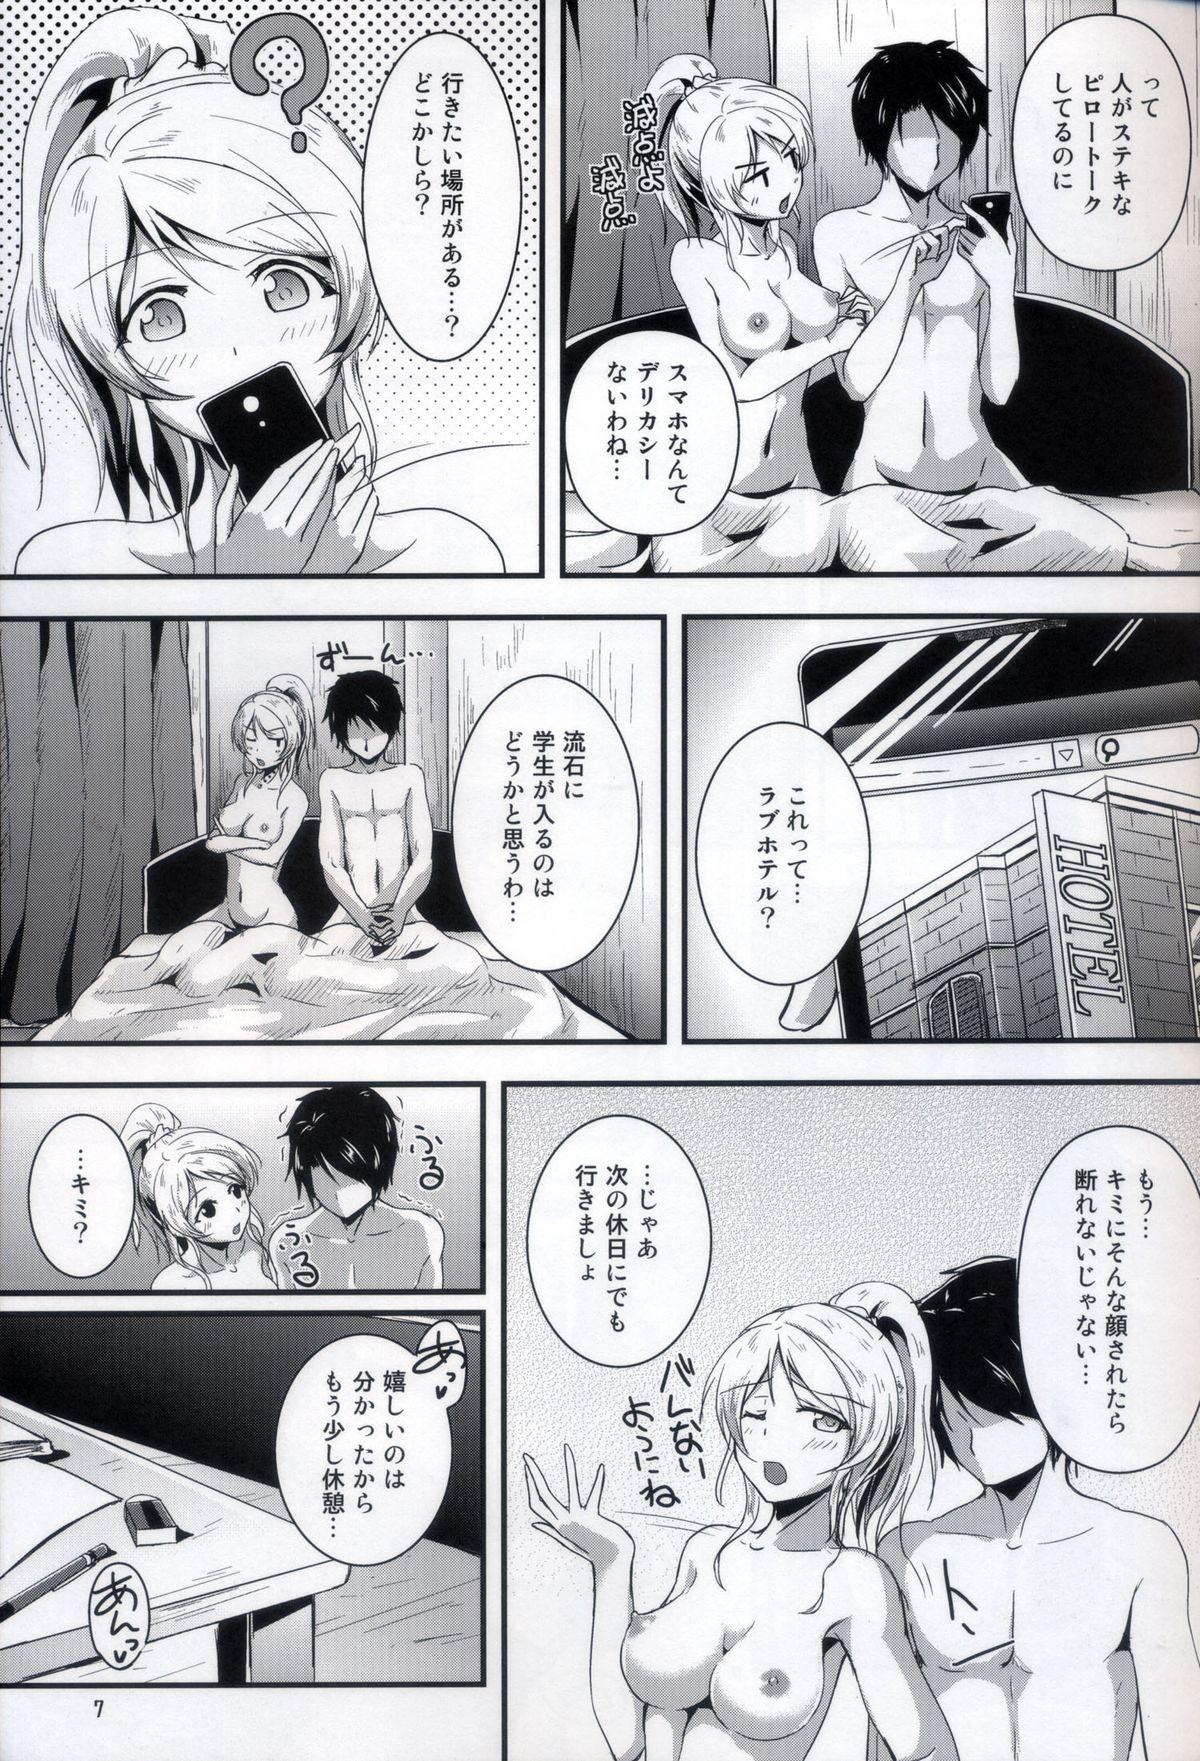 Peludo Let's Study xxx 2 - Love live Latino - Page 6